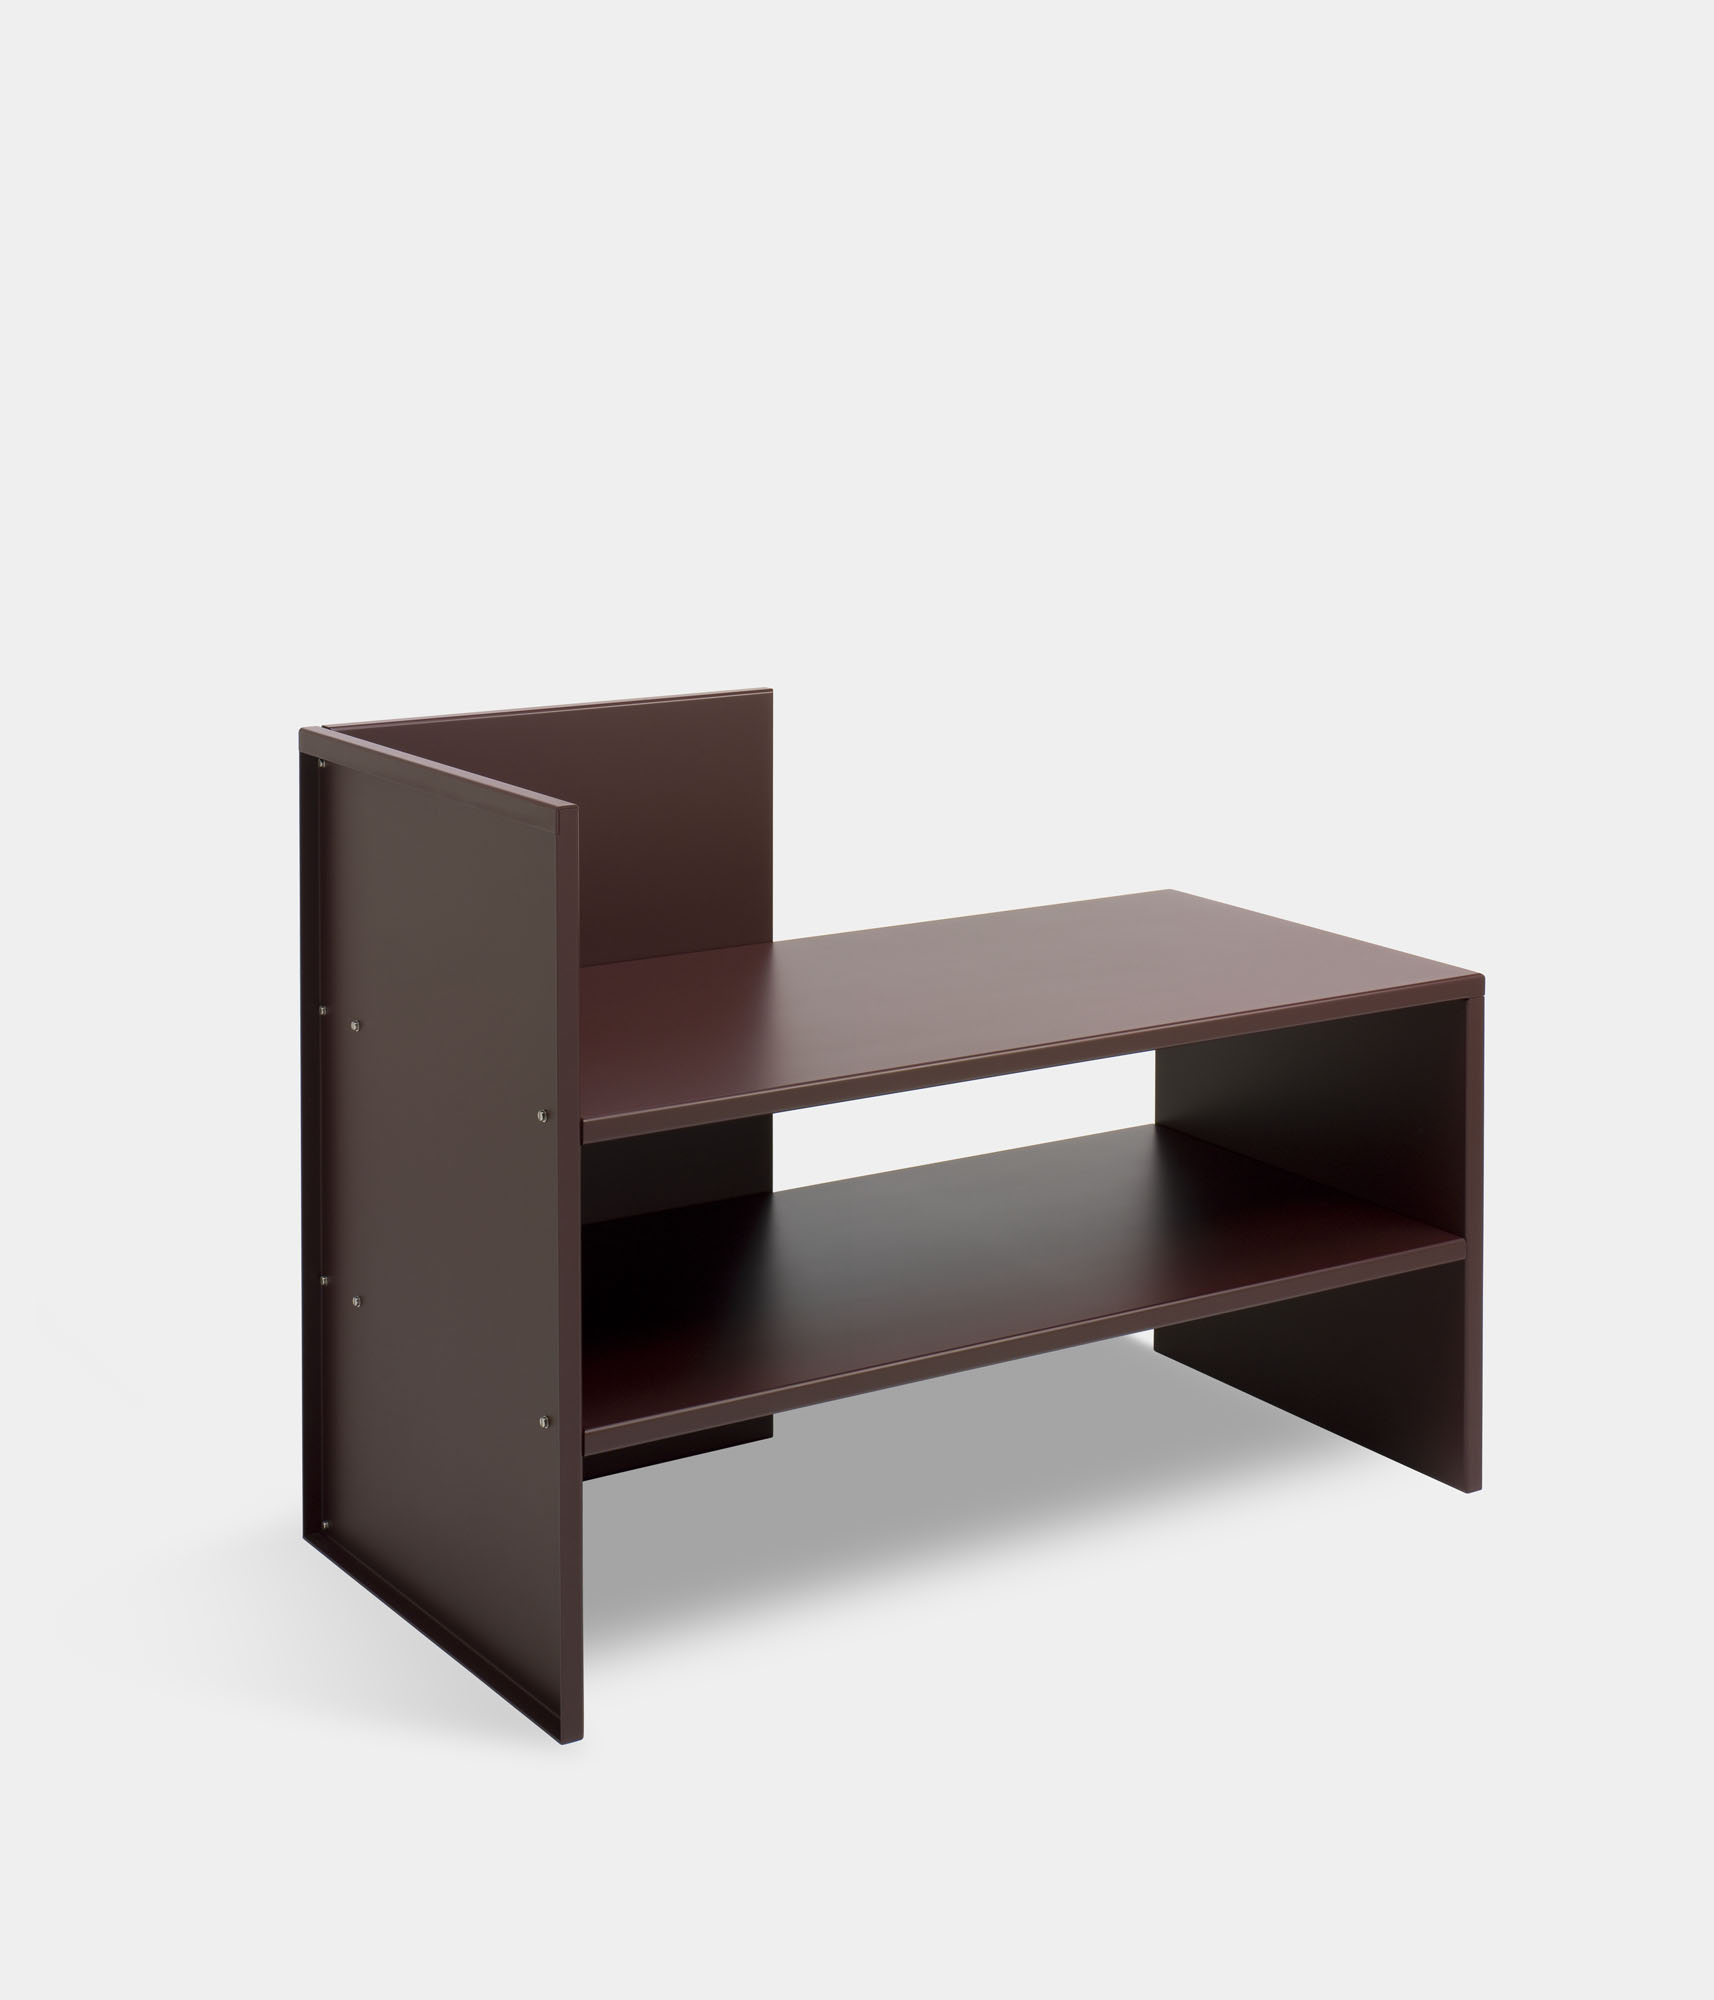 N° 15 Donald Judd Chaise